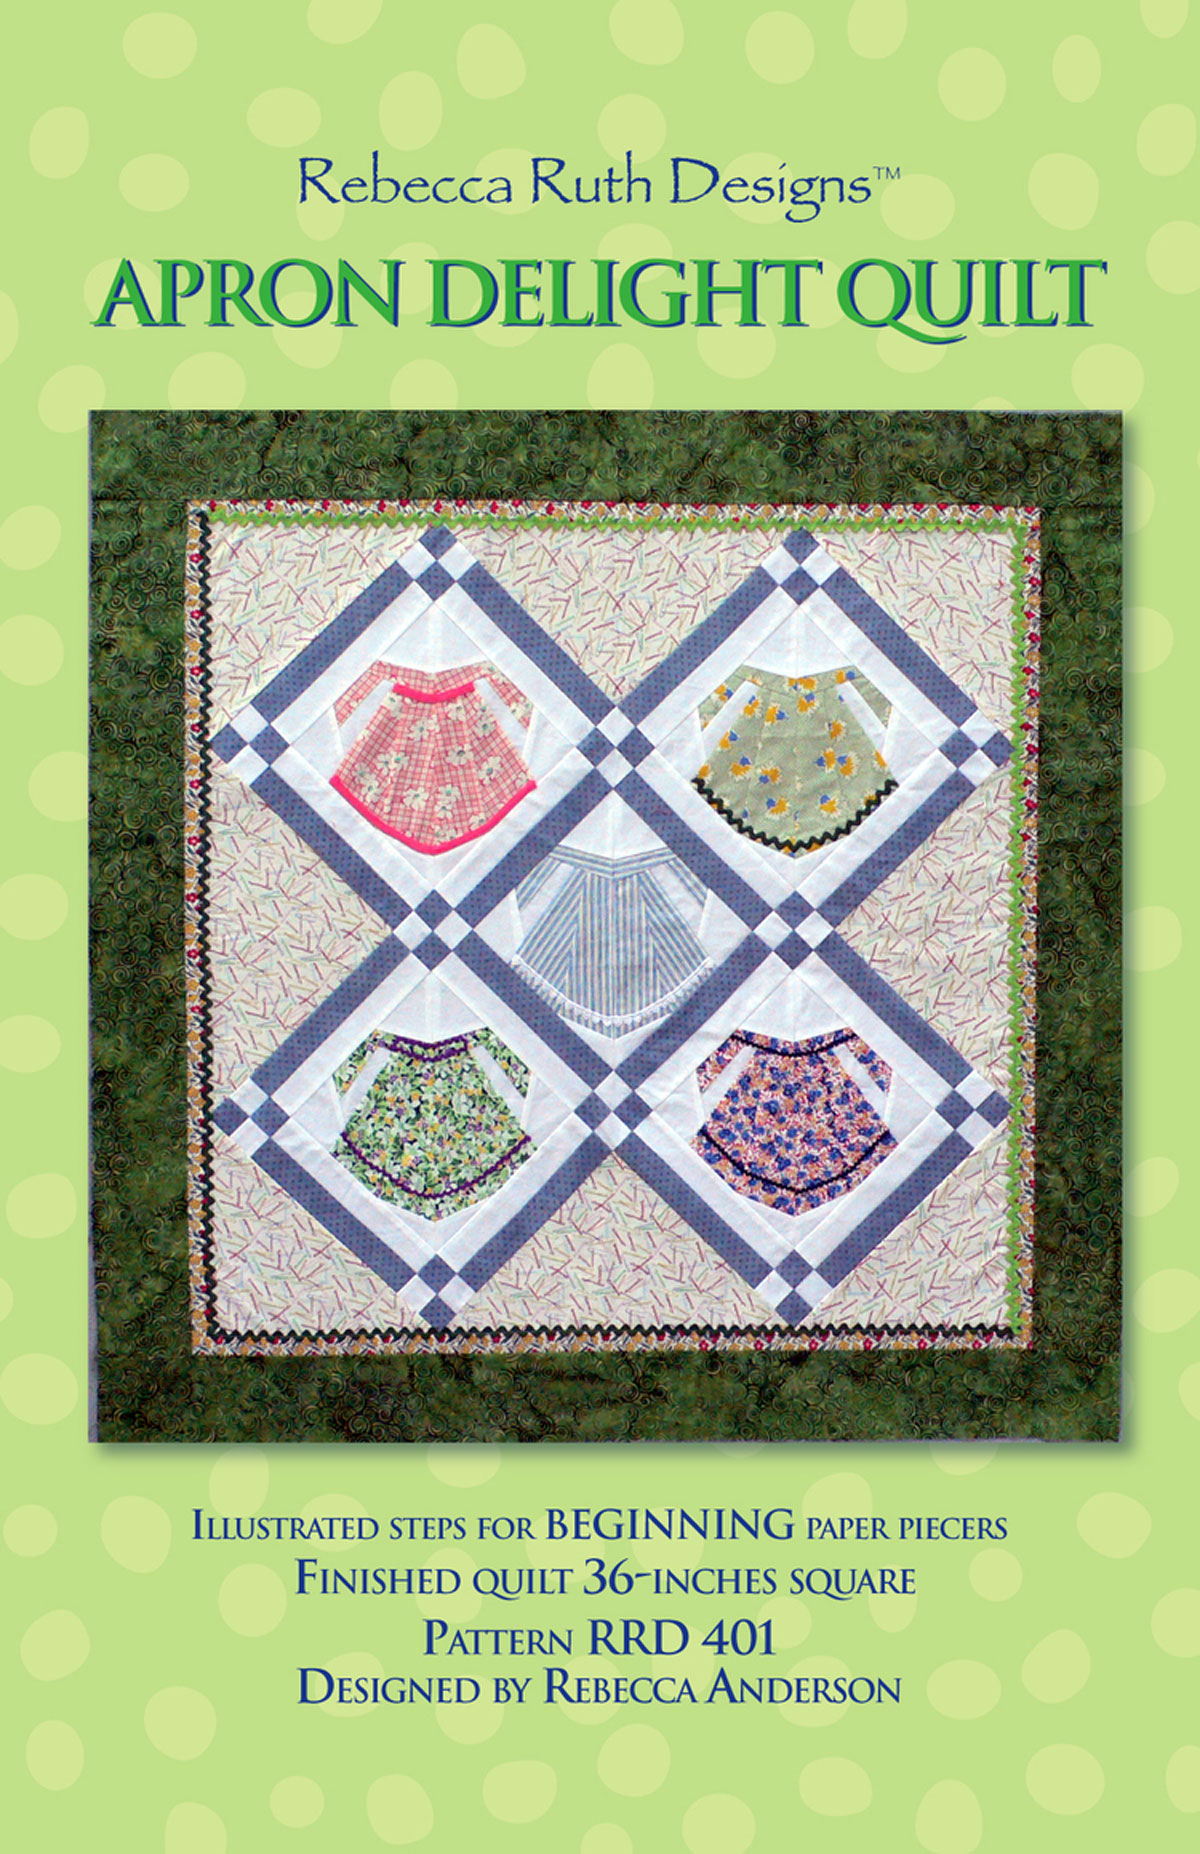 Apron-Delight-quilt-sewing-pattern-rebecca-ruth-designs-front